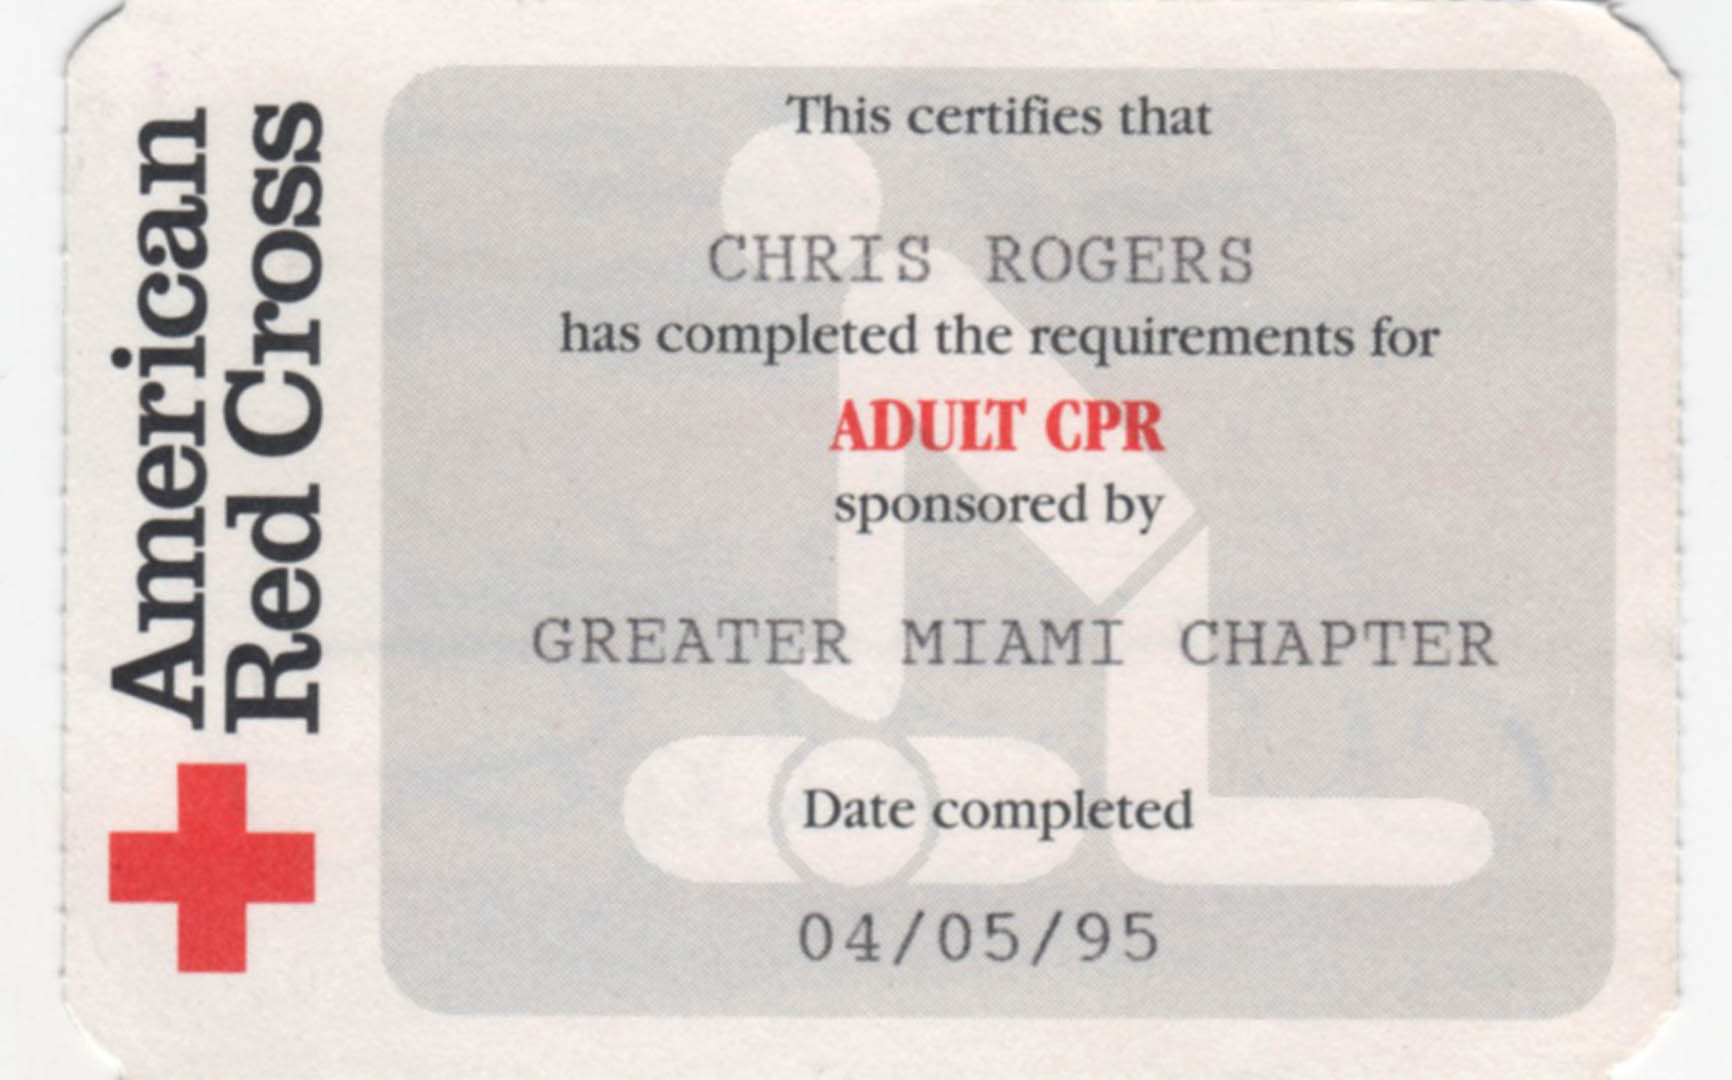 Adult CPR card from American Red Cross